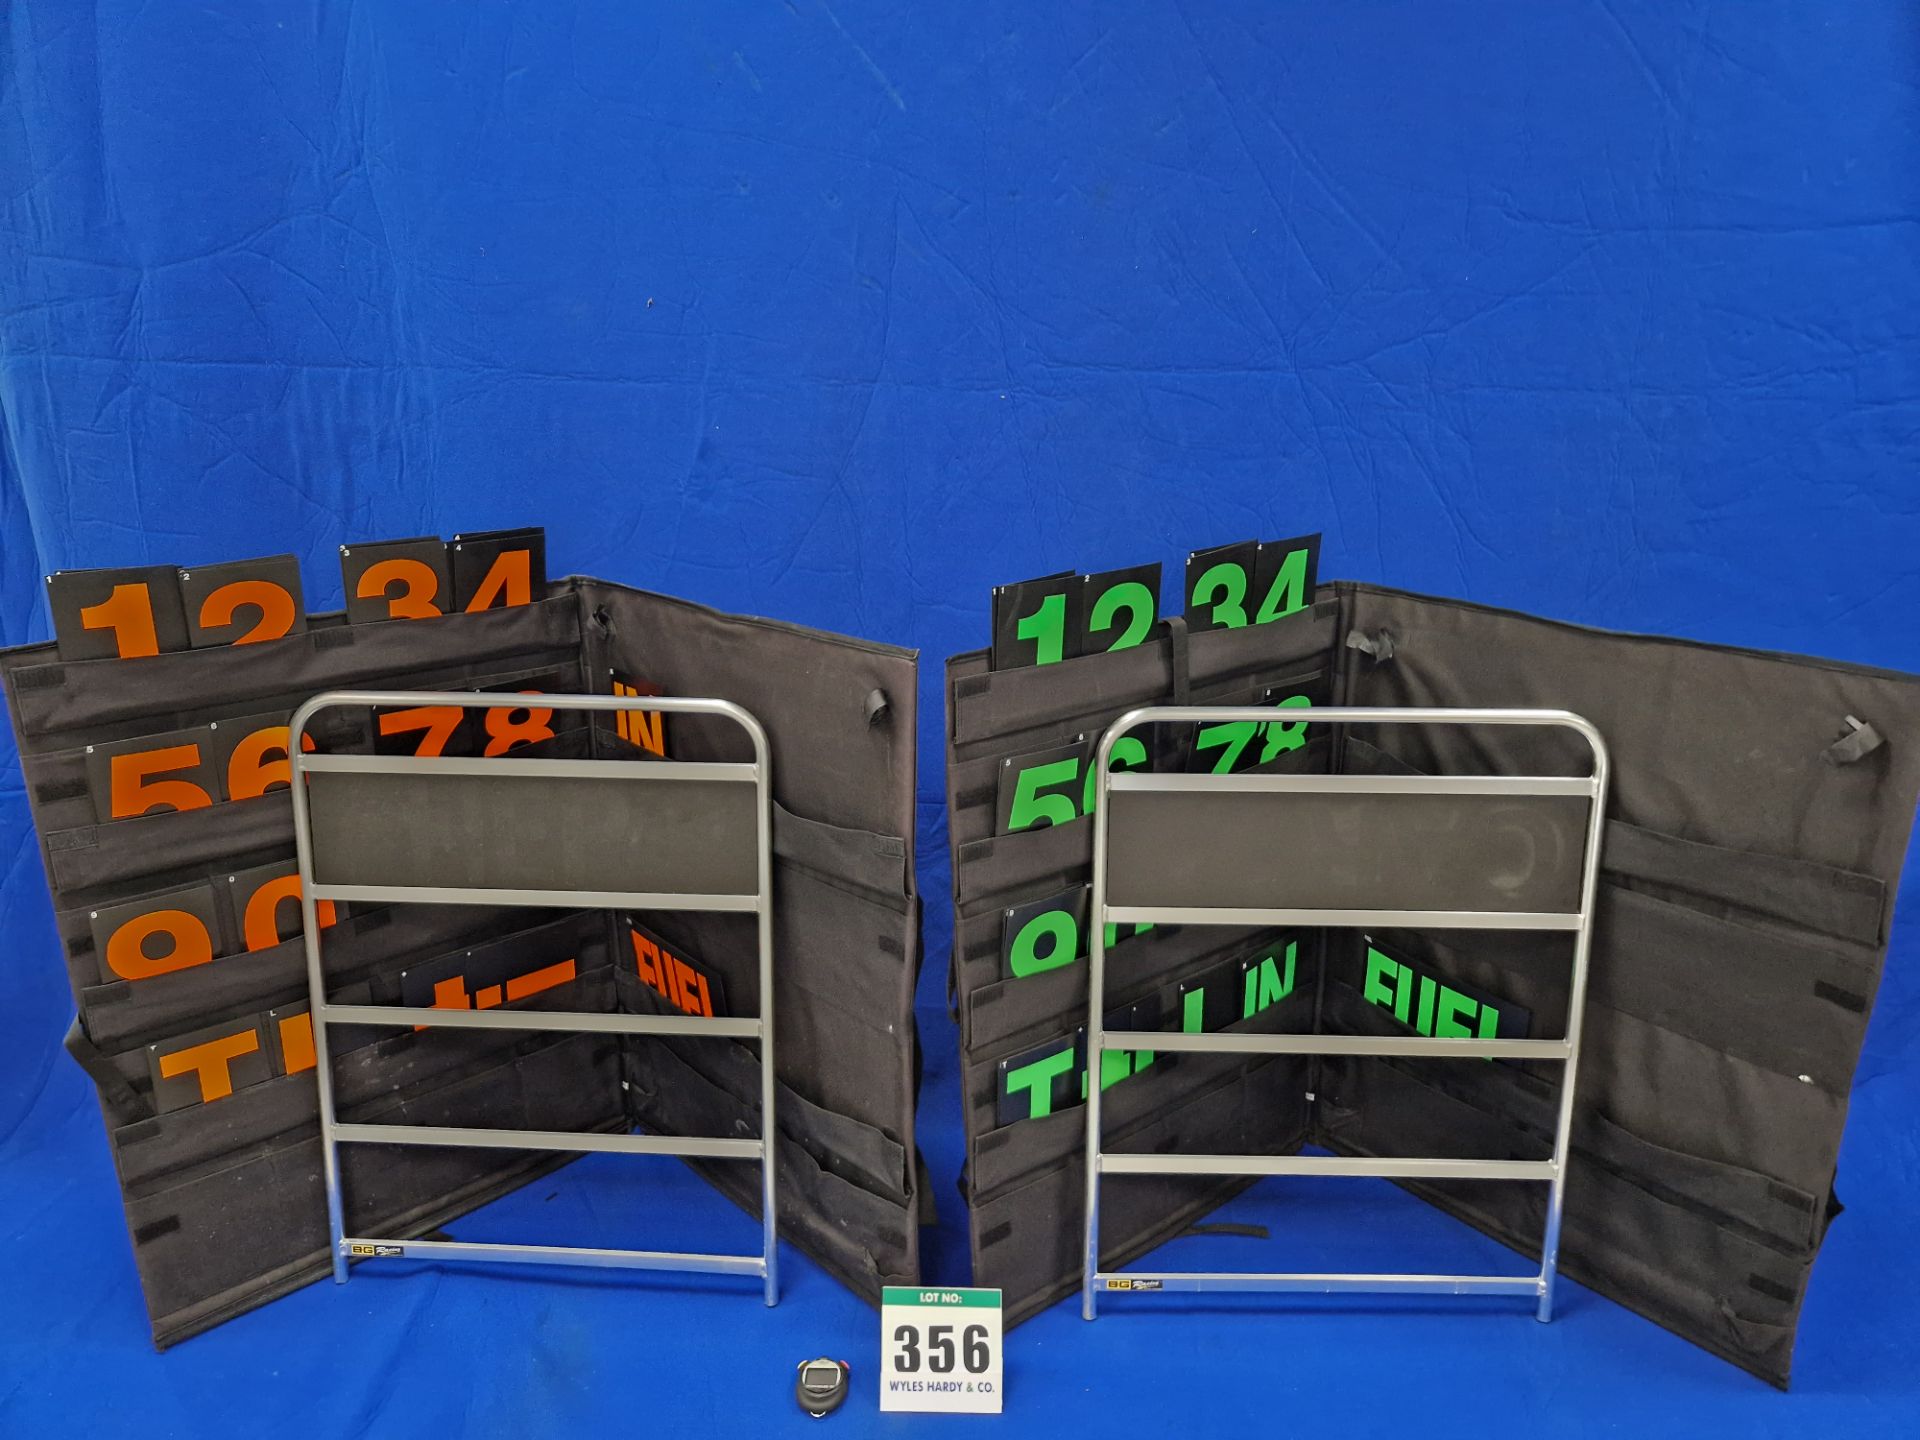 One Pair of BG RACING Pit Boards in Fabric Storage and Carry Cases with A FASTIME 21 Digital Stop